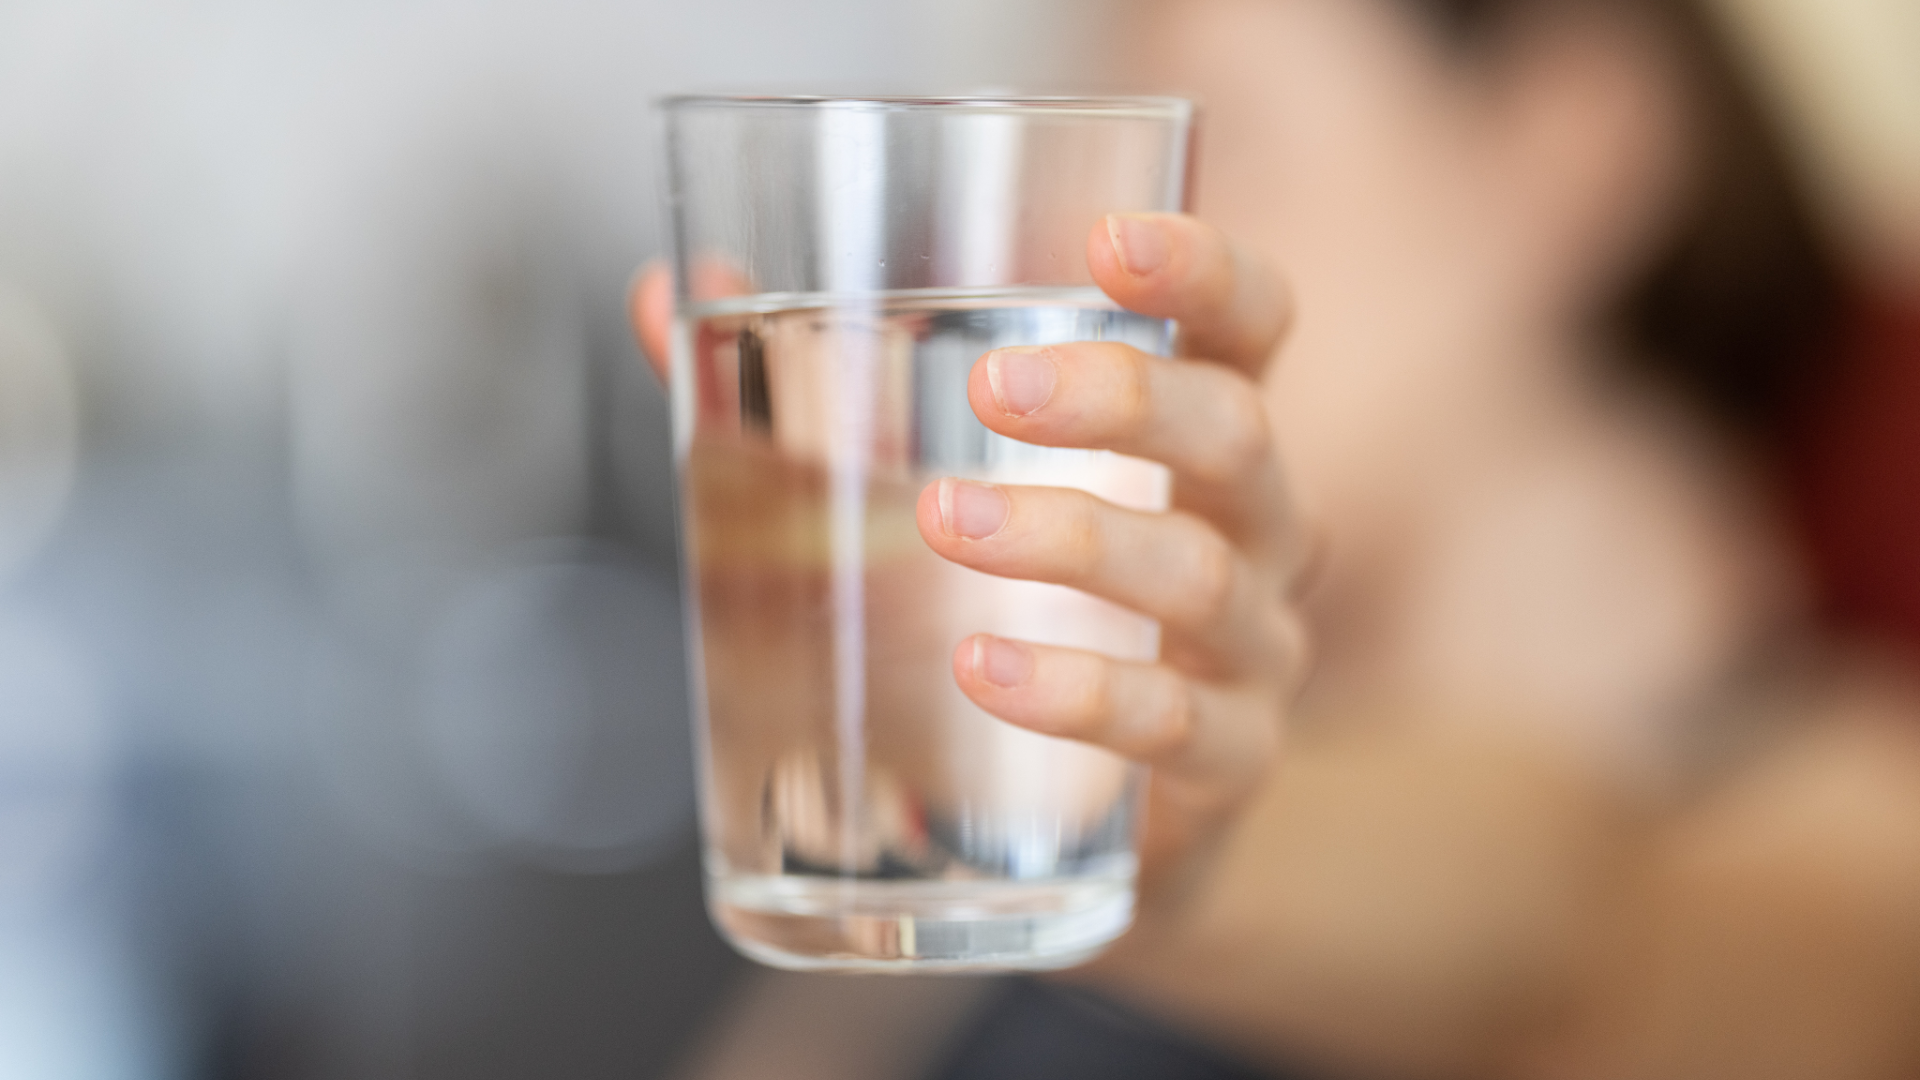 Carcinogenic ‘forever chemicals’ found in England’s drinking water samples